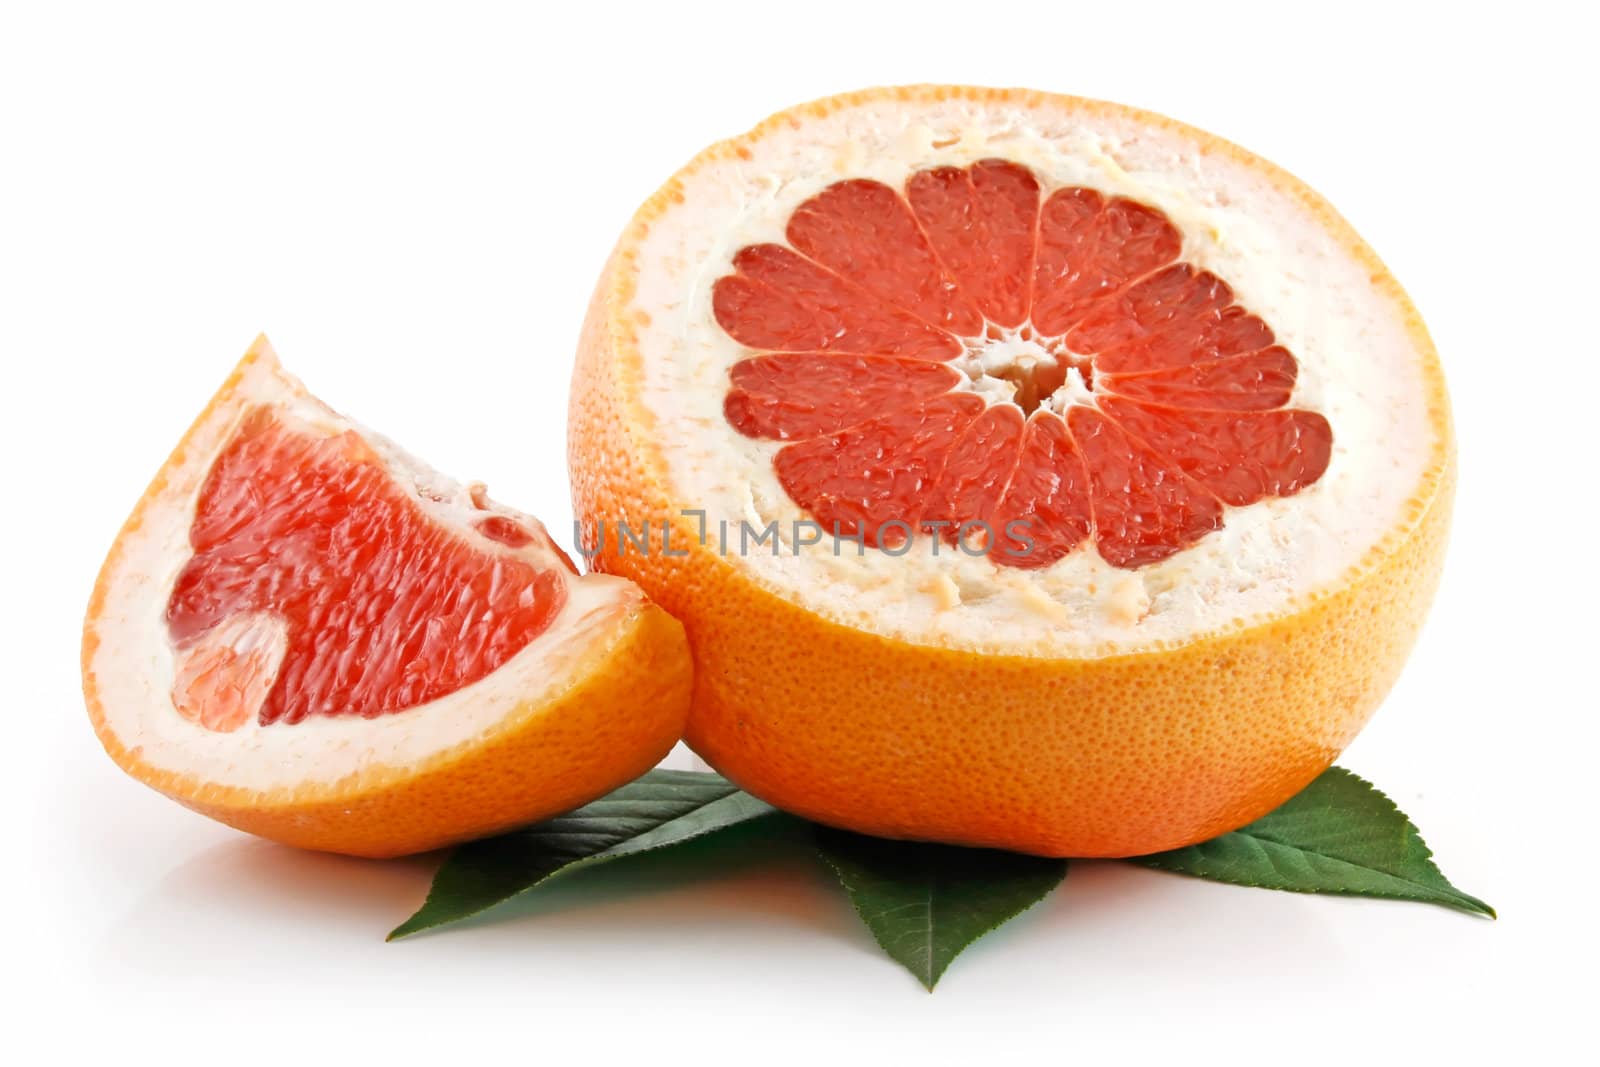 Ripe Sliced Grapefruit with Leaves Isolated on White Background